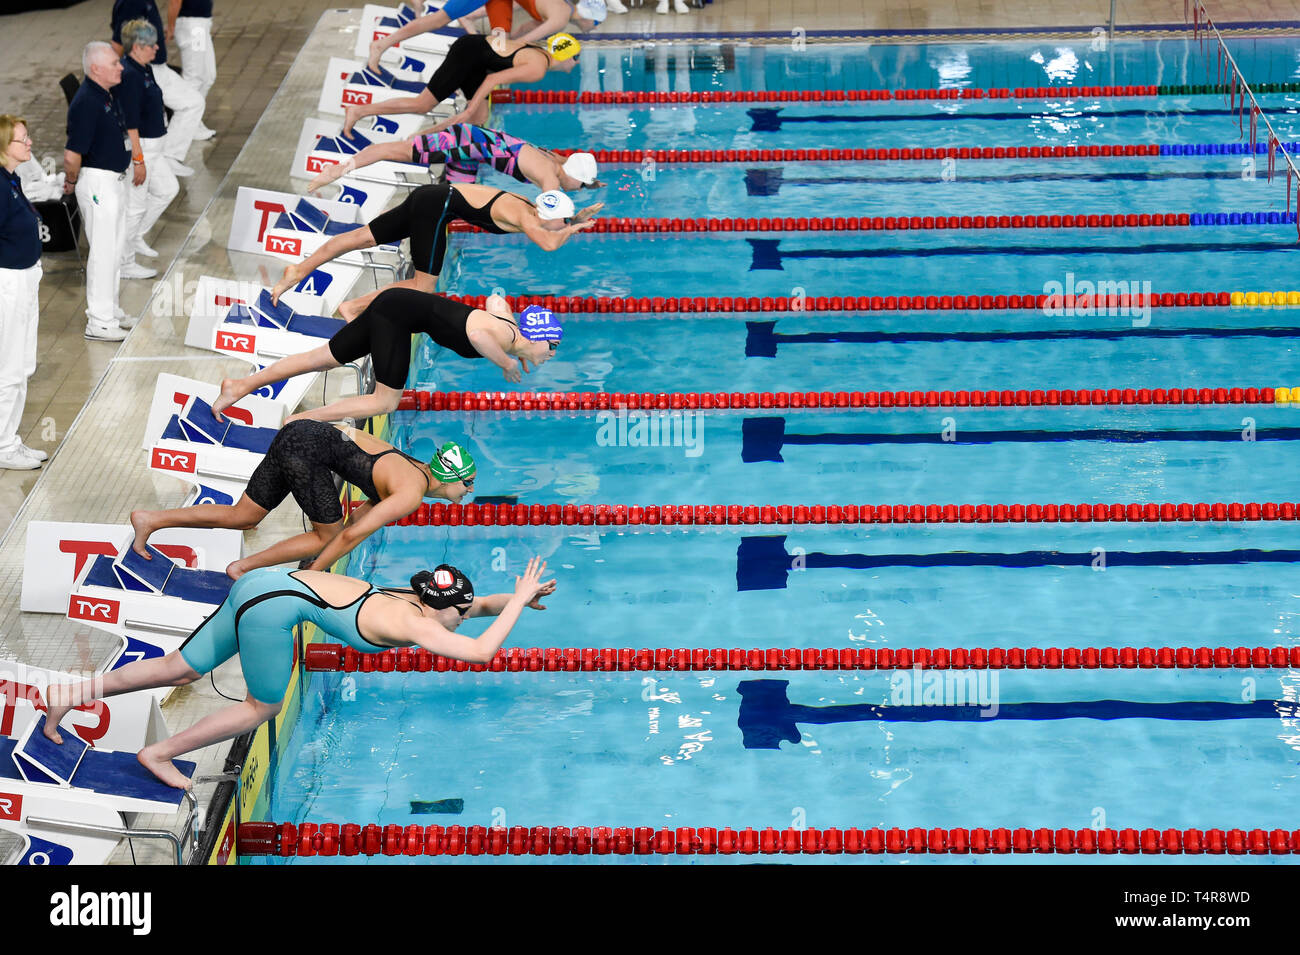 Swimmers dive into the water in heat 6 of the Women's 50m Freestyle event during day three of the 2019 British Swimming Championships at Tollcross International Swimming Centre, Glasgow. Stock Photo